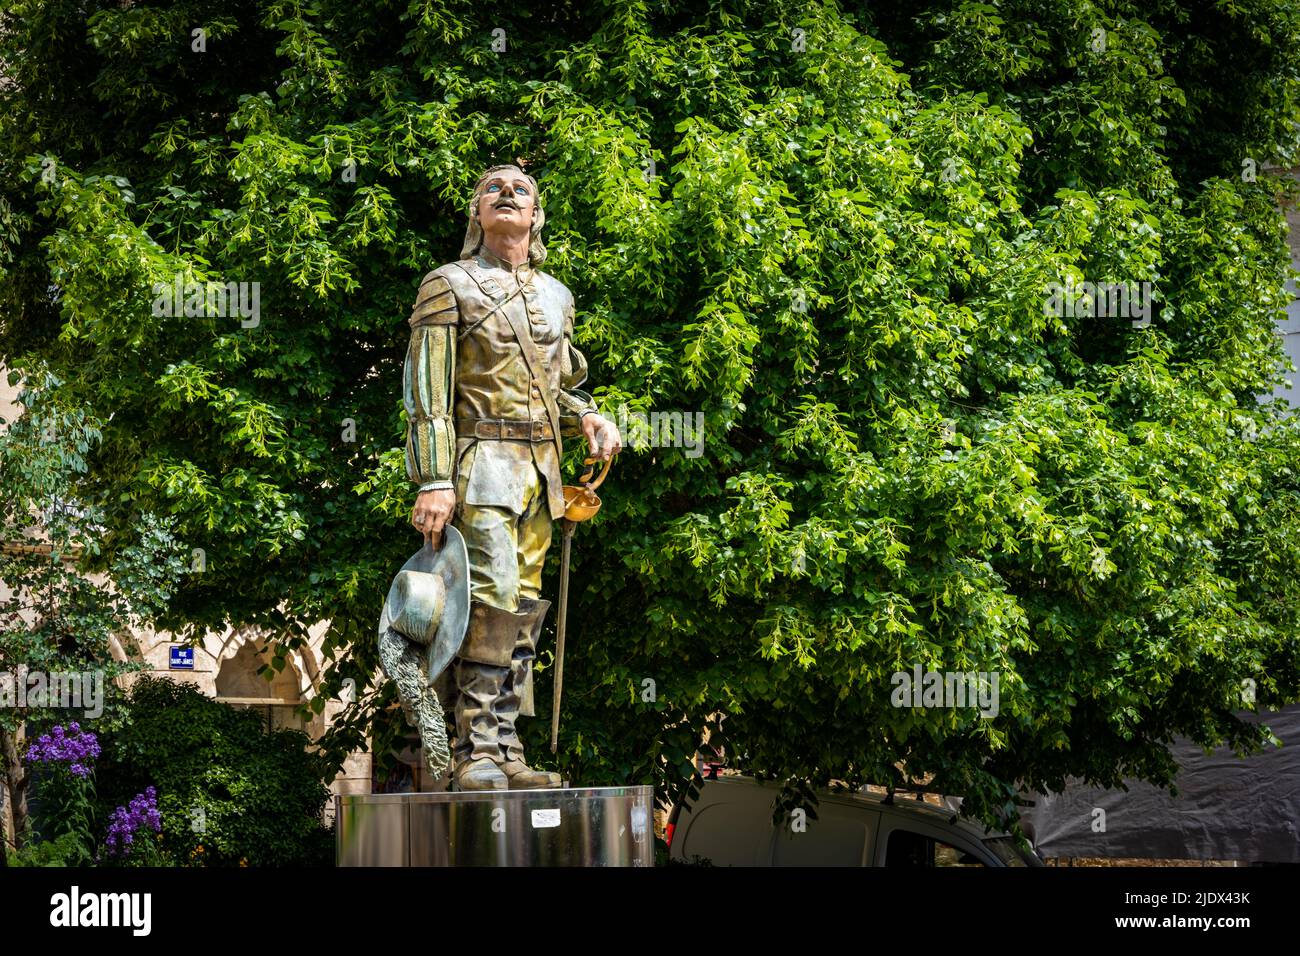 Bergerac, France - May 10th 2022 - Statue of the fiction figure of Cyrano de Bergerac Stock Photo